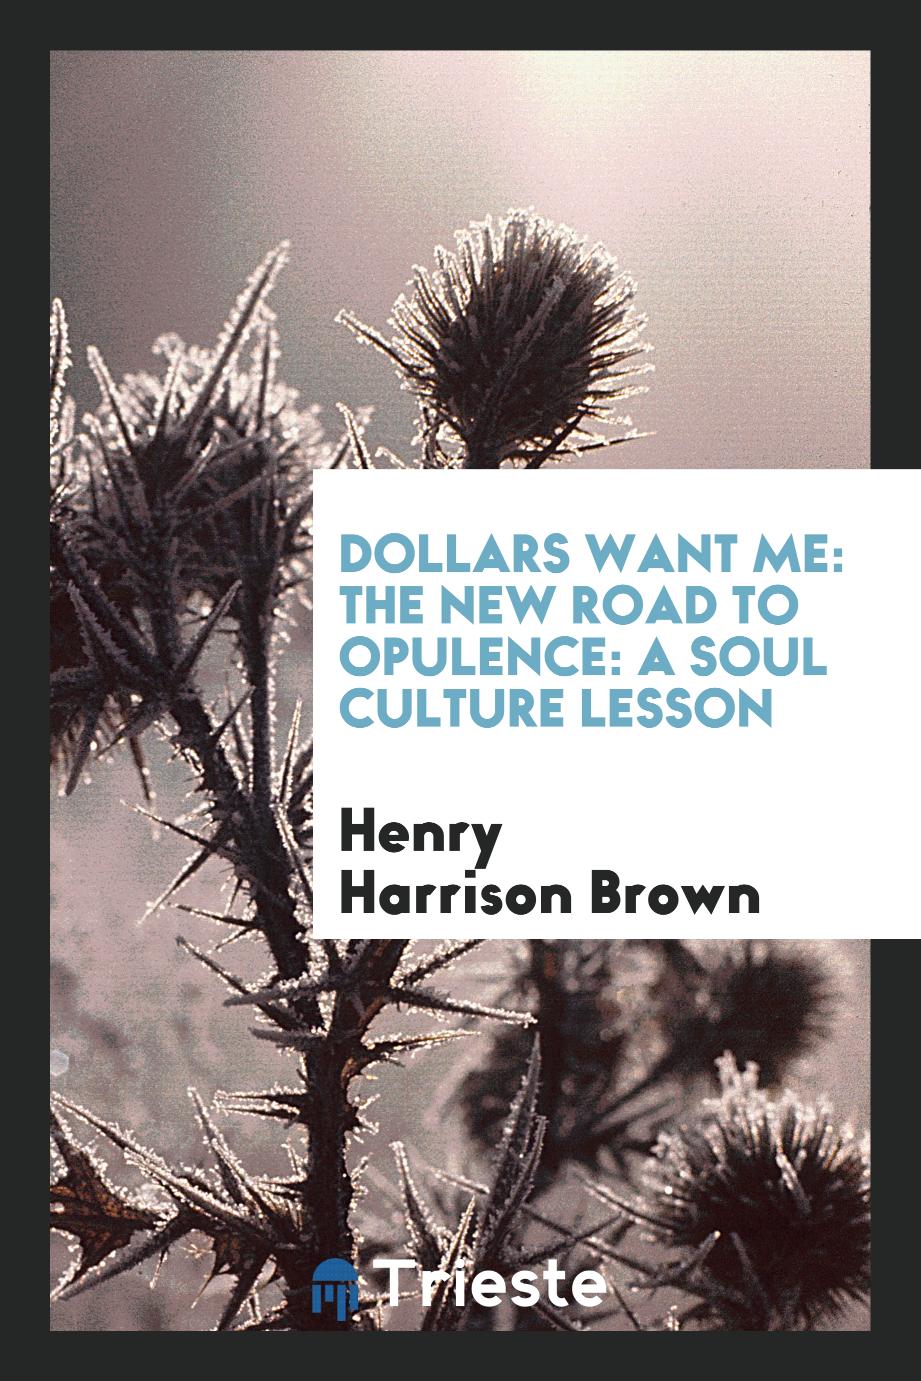 Dollars Want Me: The New Road to Opulence: a Soul Culture Lesson